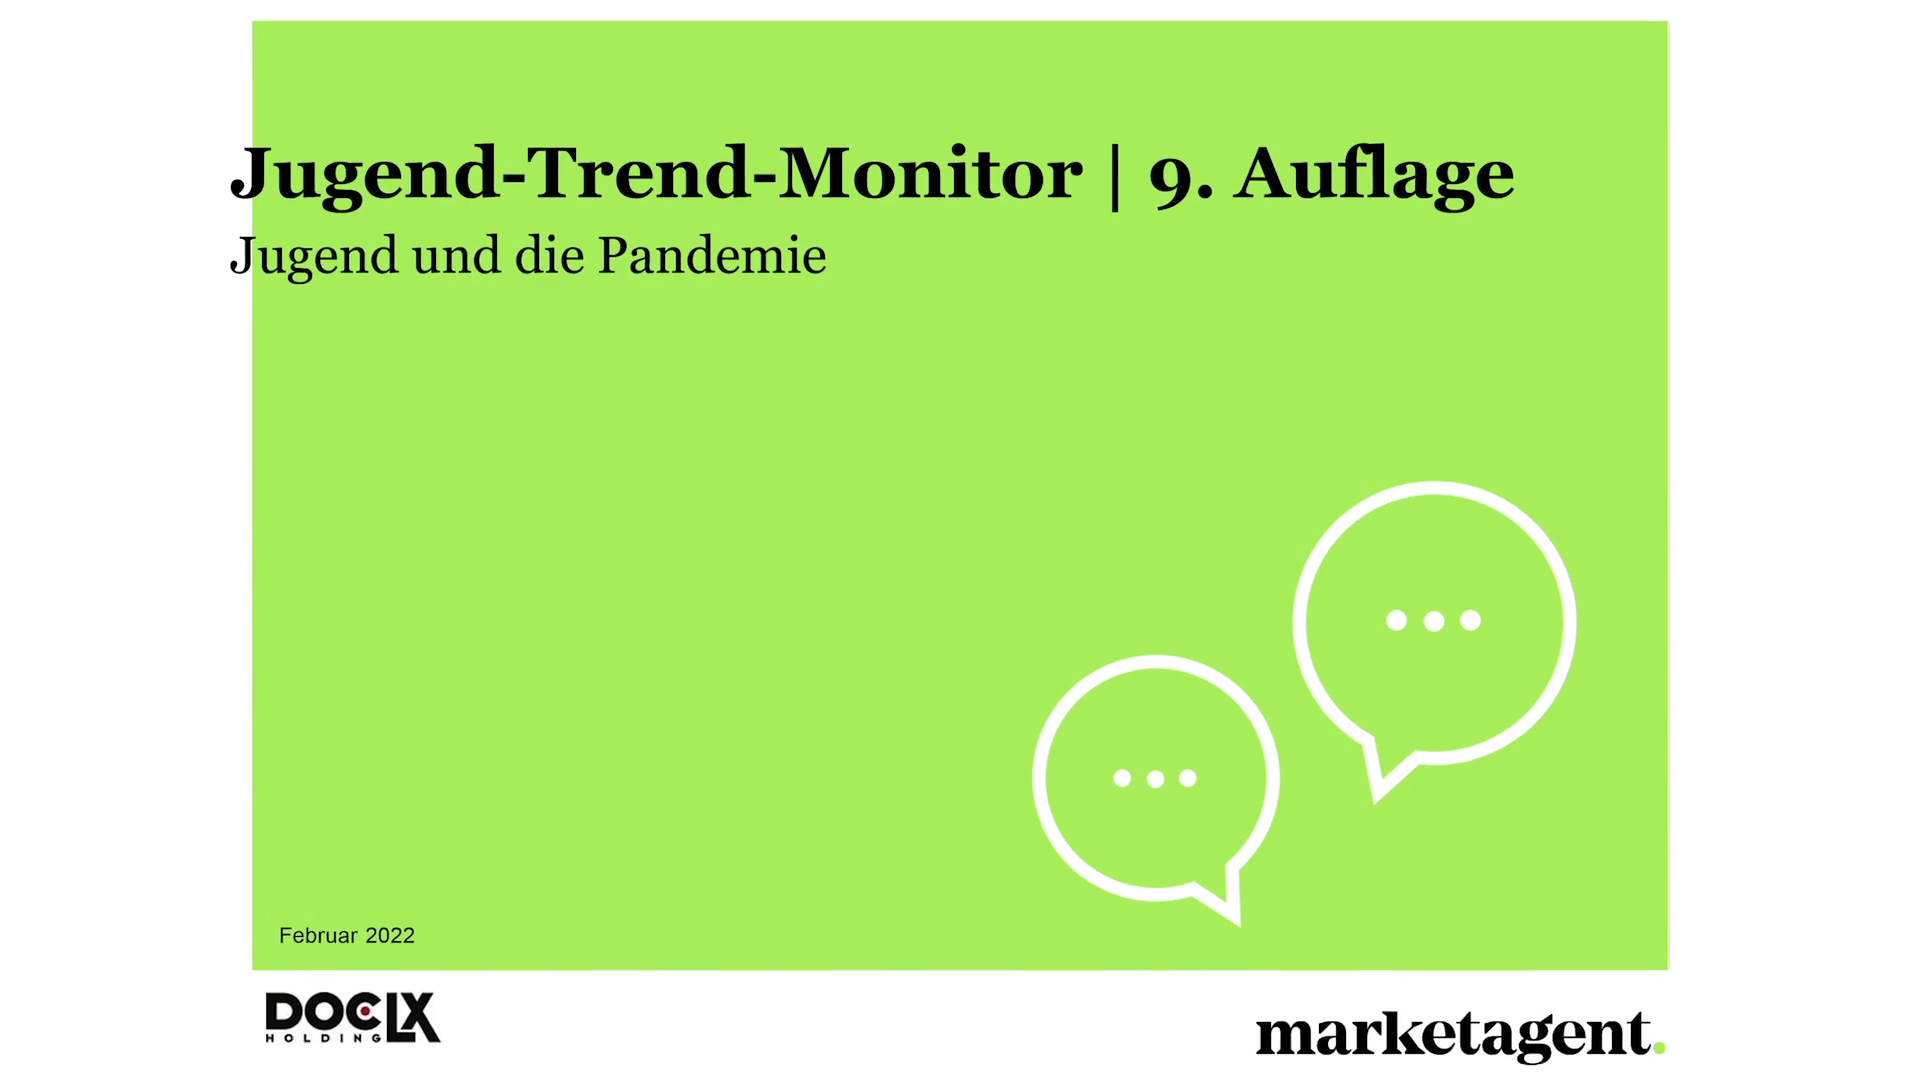 Jugend-Trend-Monitor